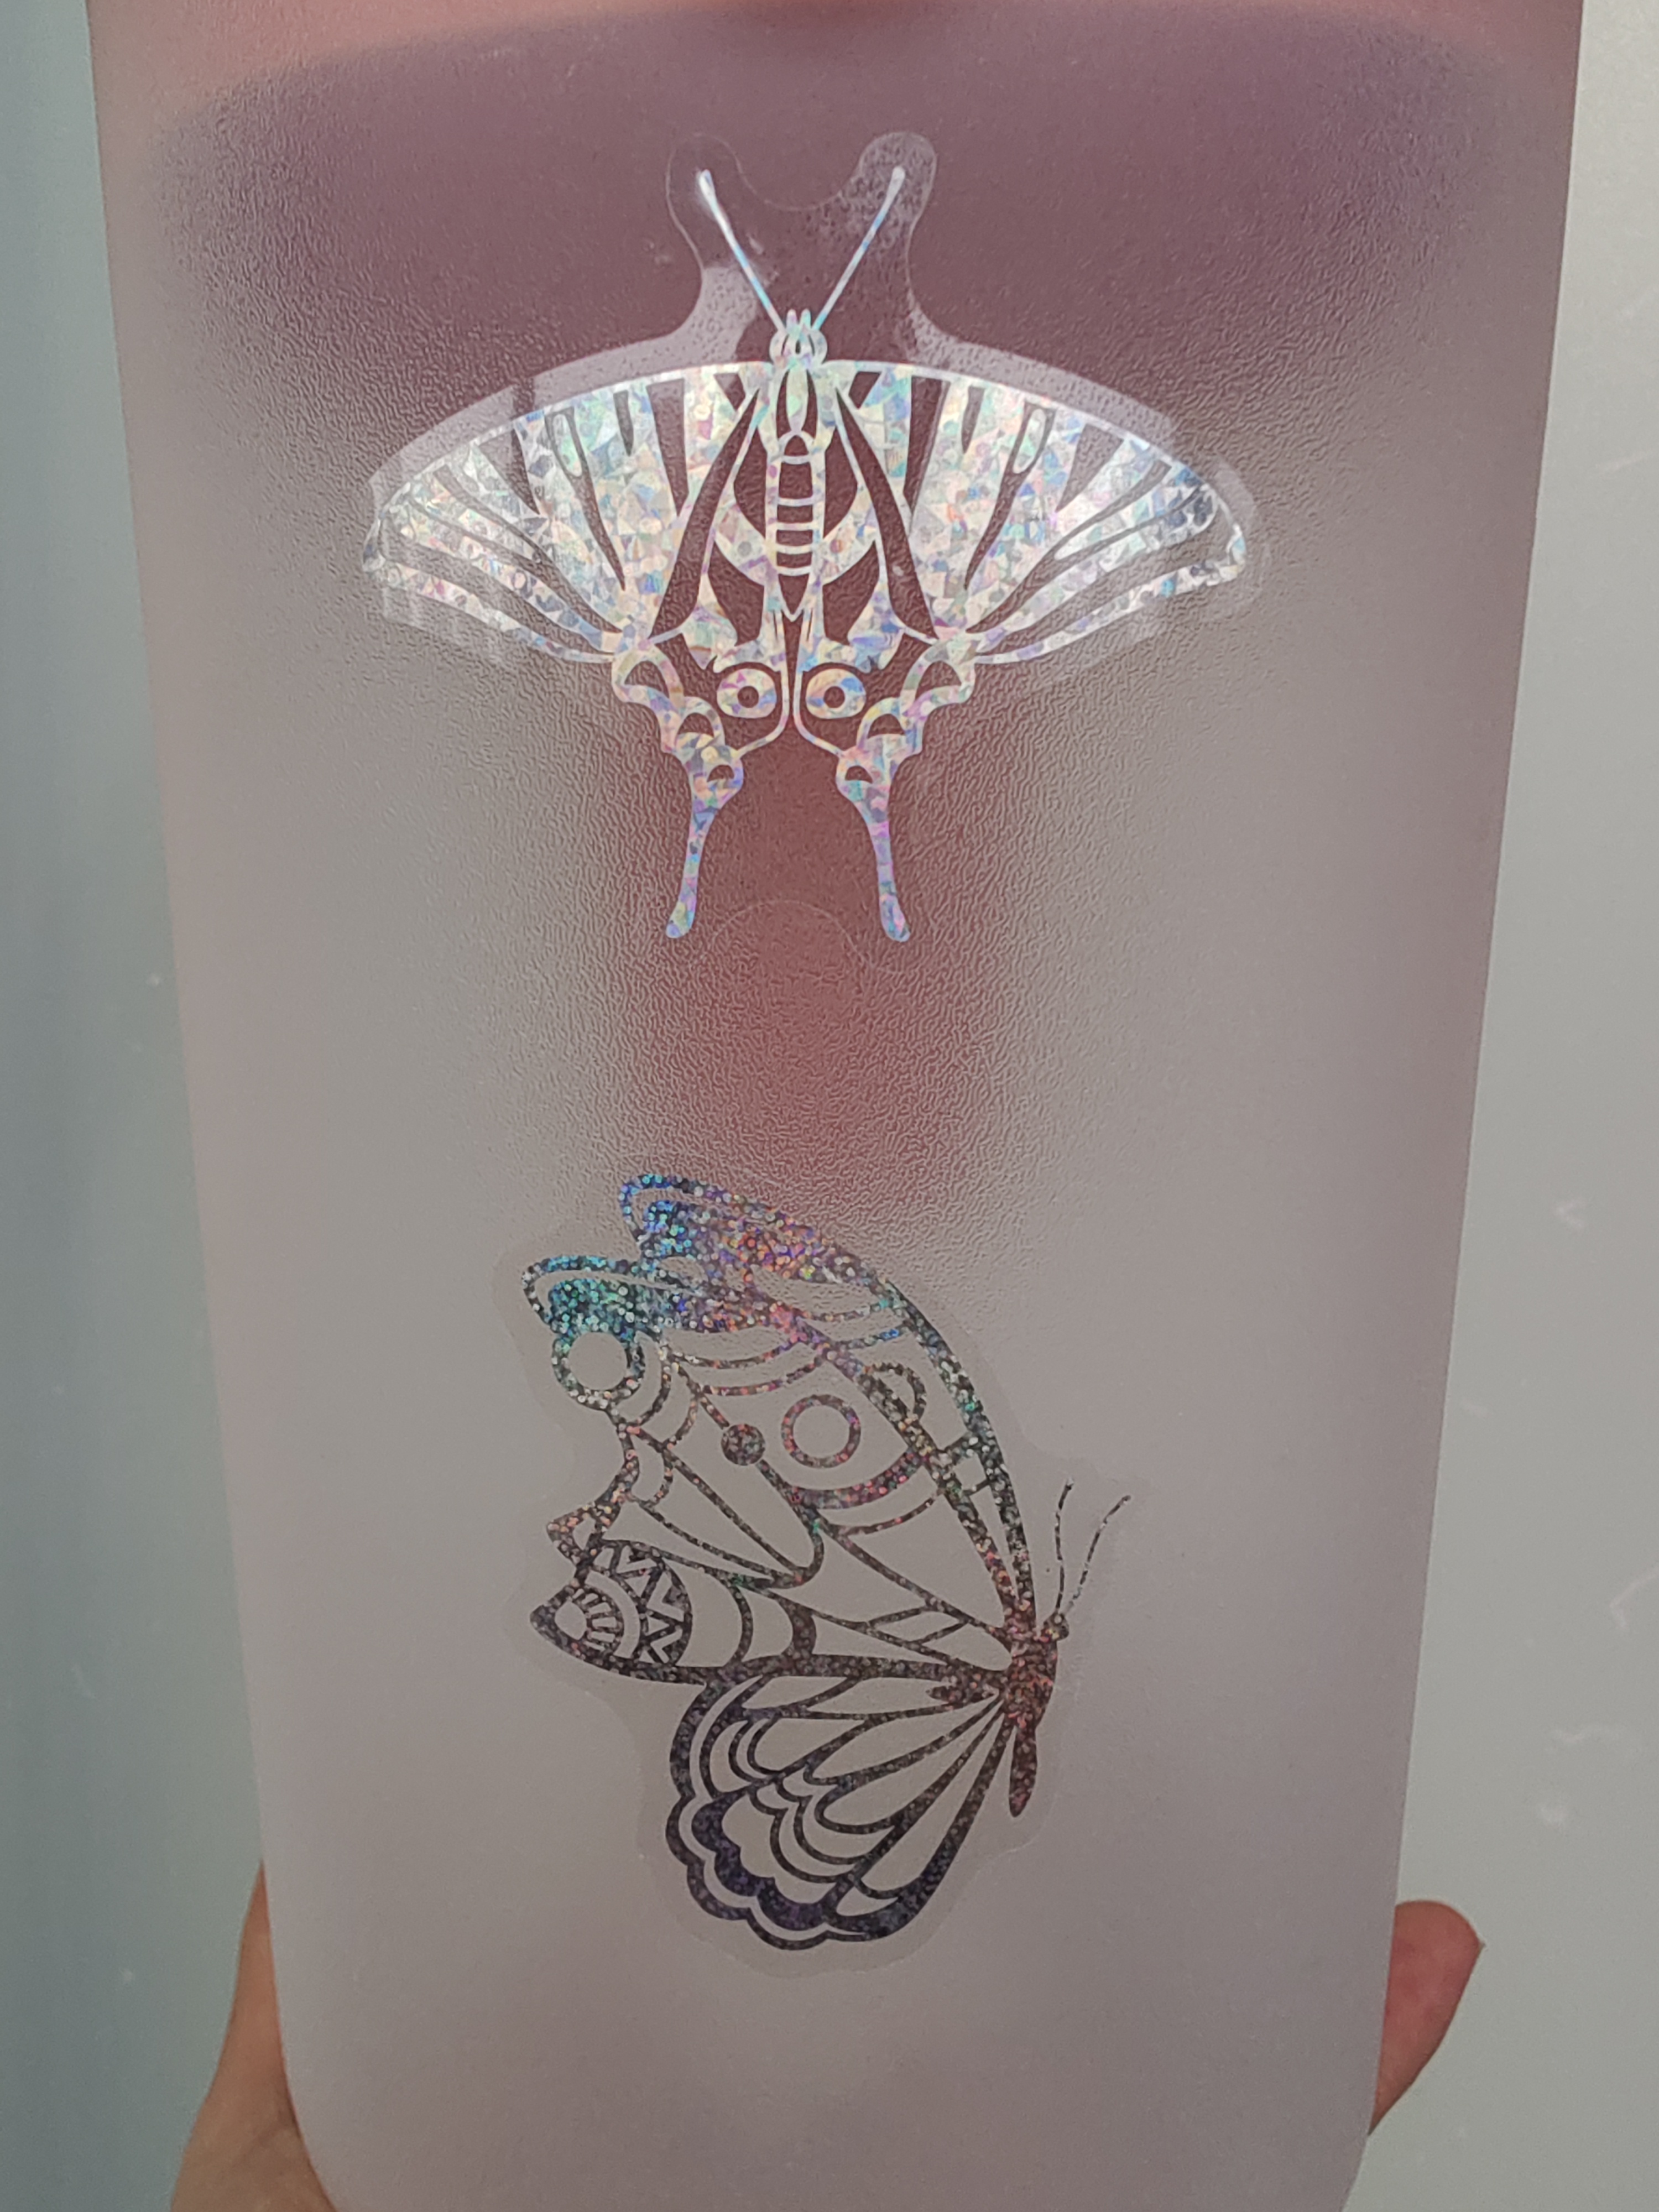 Aromoty Butterfly Stickers Set Ice Crystals Holographic Shiny Transparent Resin Waterproof Stickers Decals (80 Pieces with 4 Themes) for